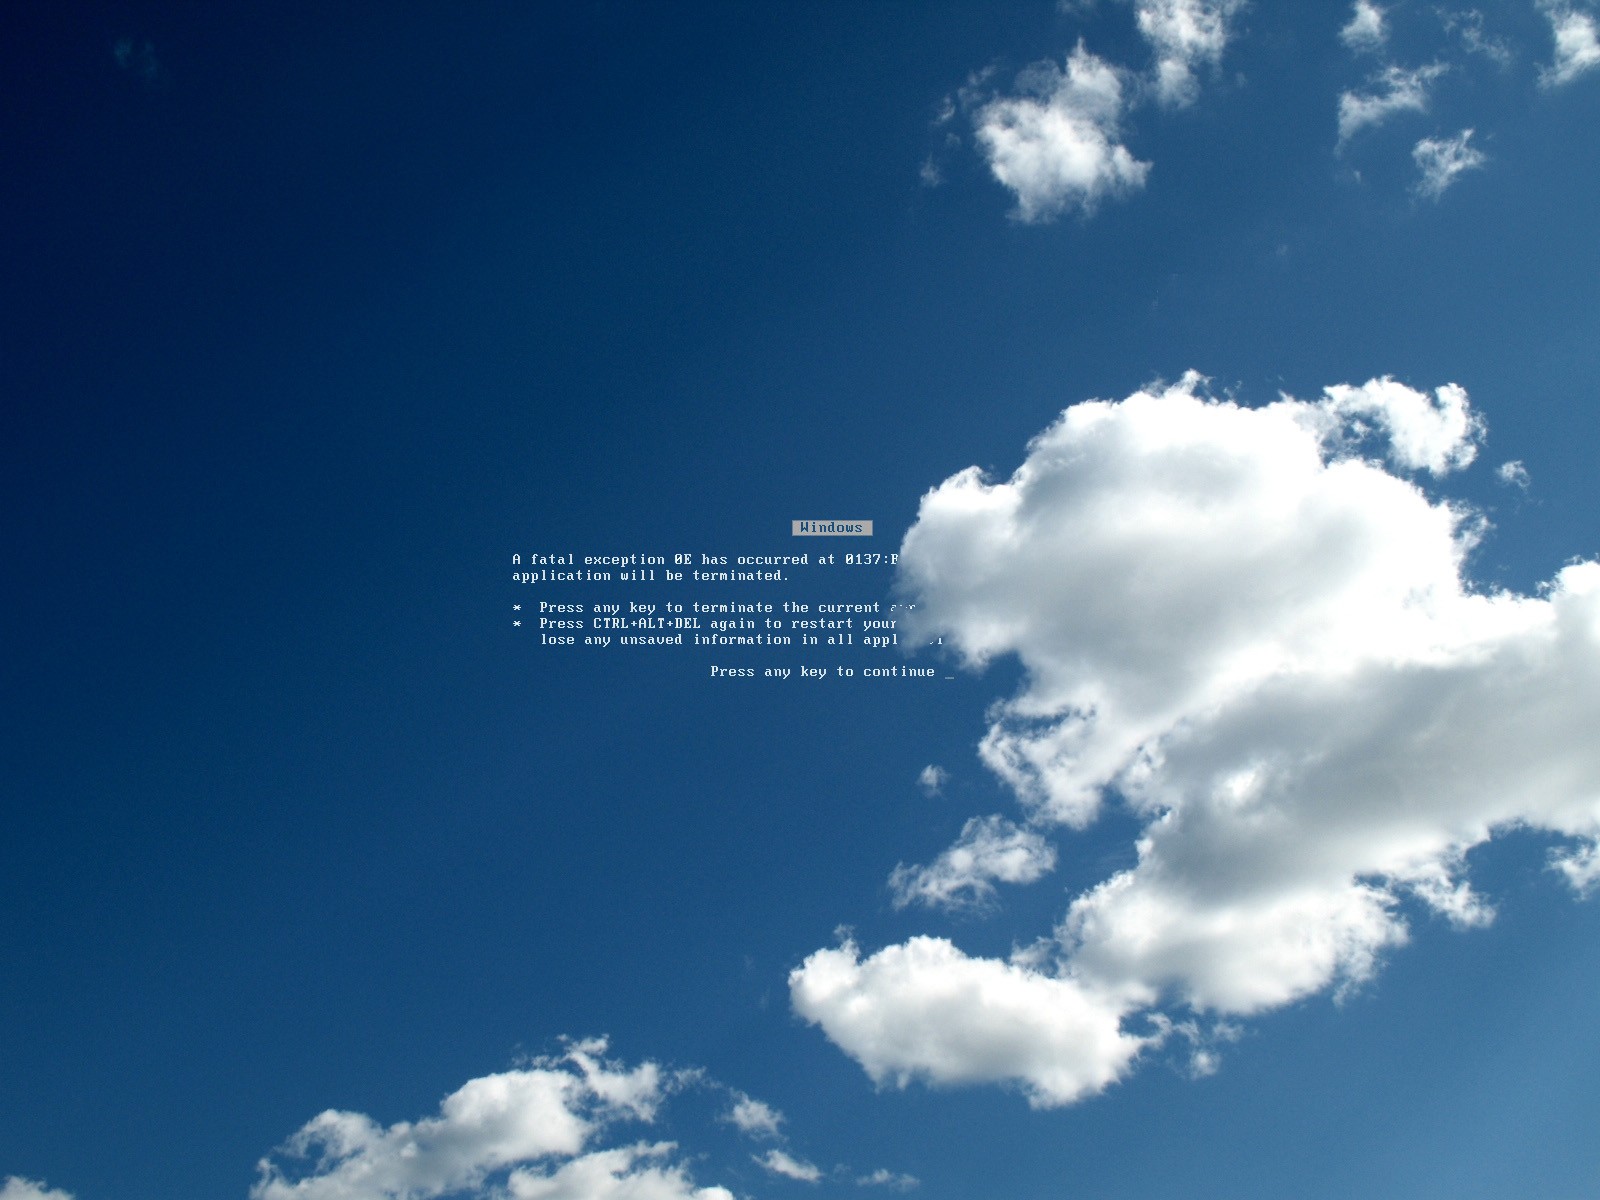 Earth Blue Clouds Wallpapers